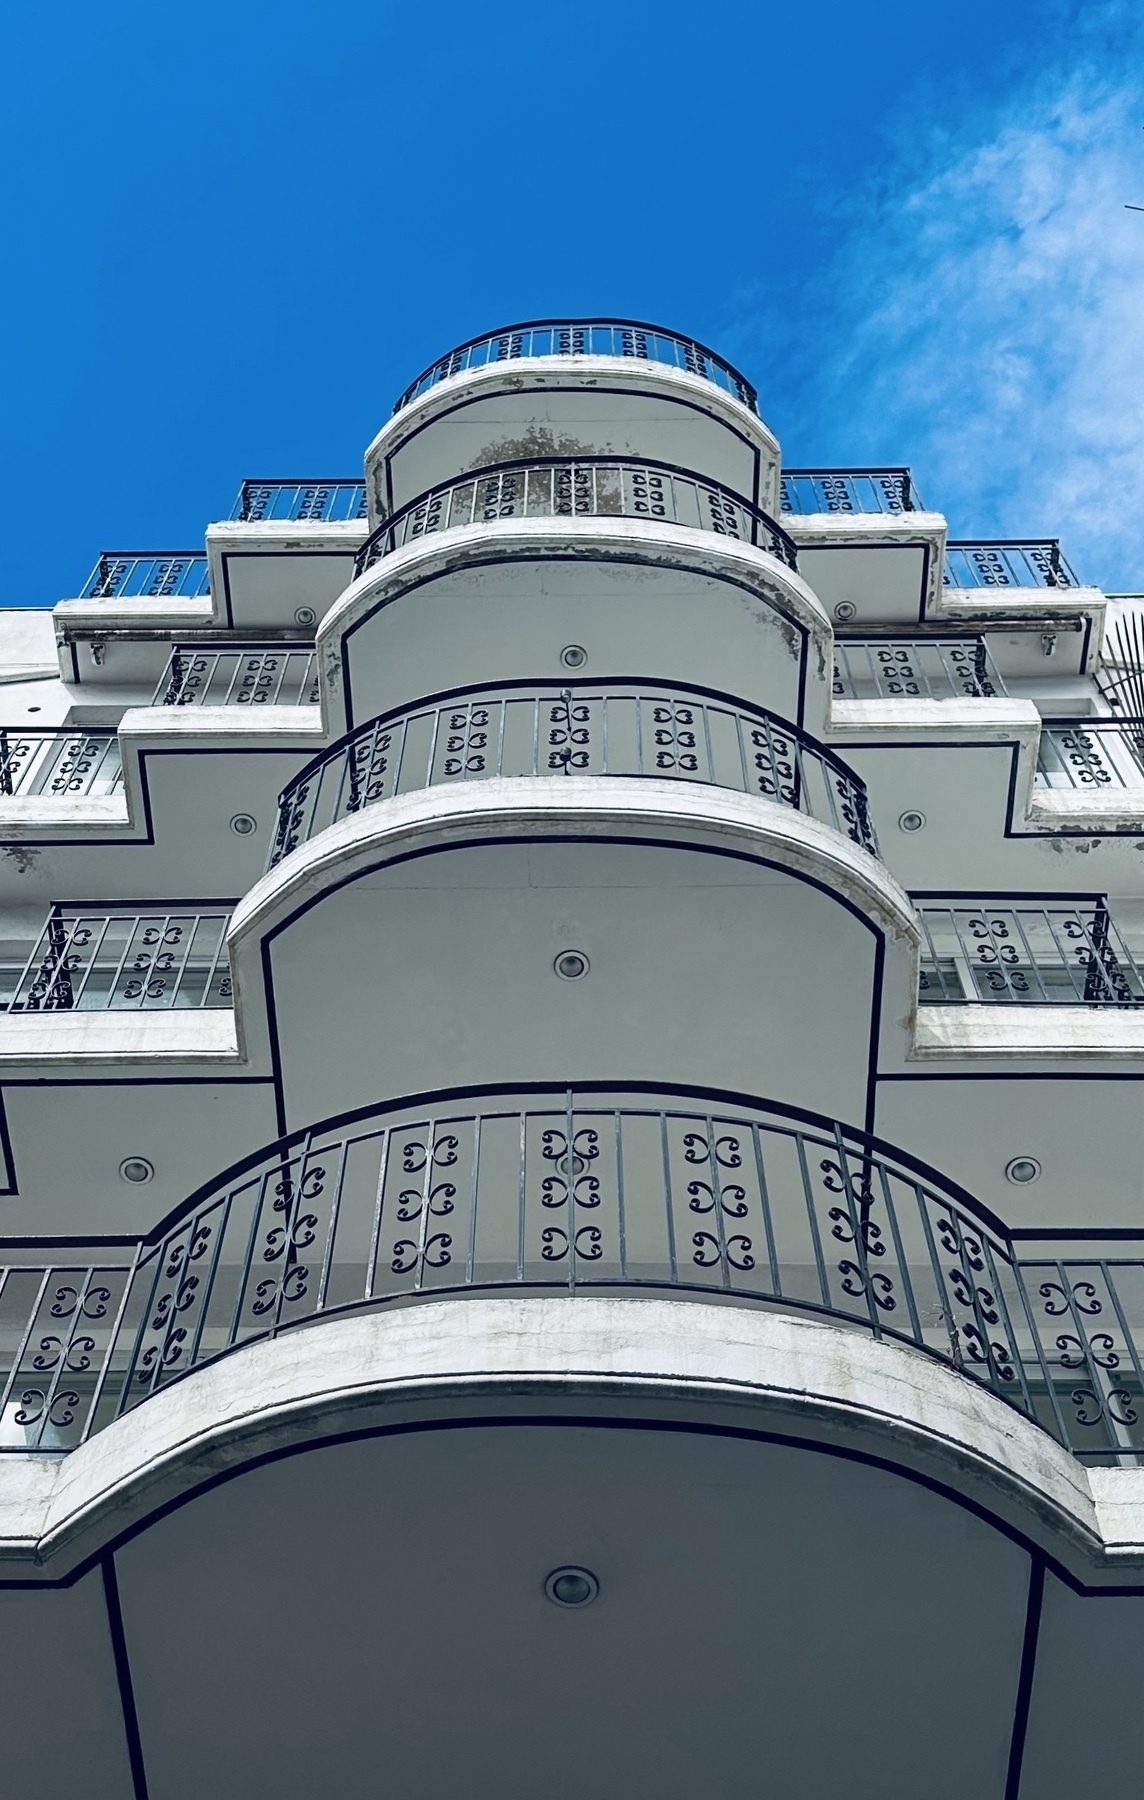 Looking up at a white and black art deco building with a series of balconies, underneath a blue sky.